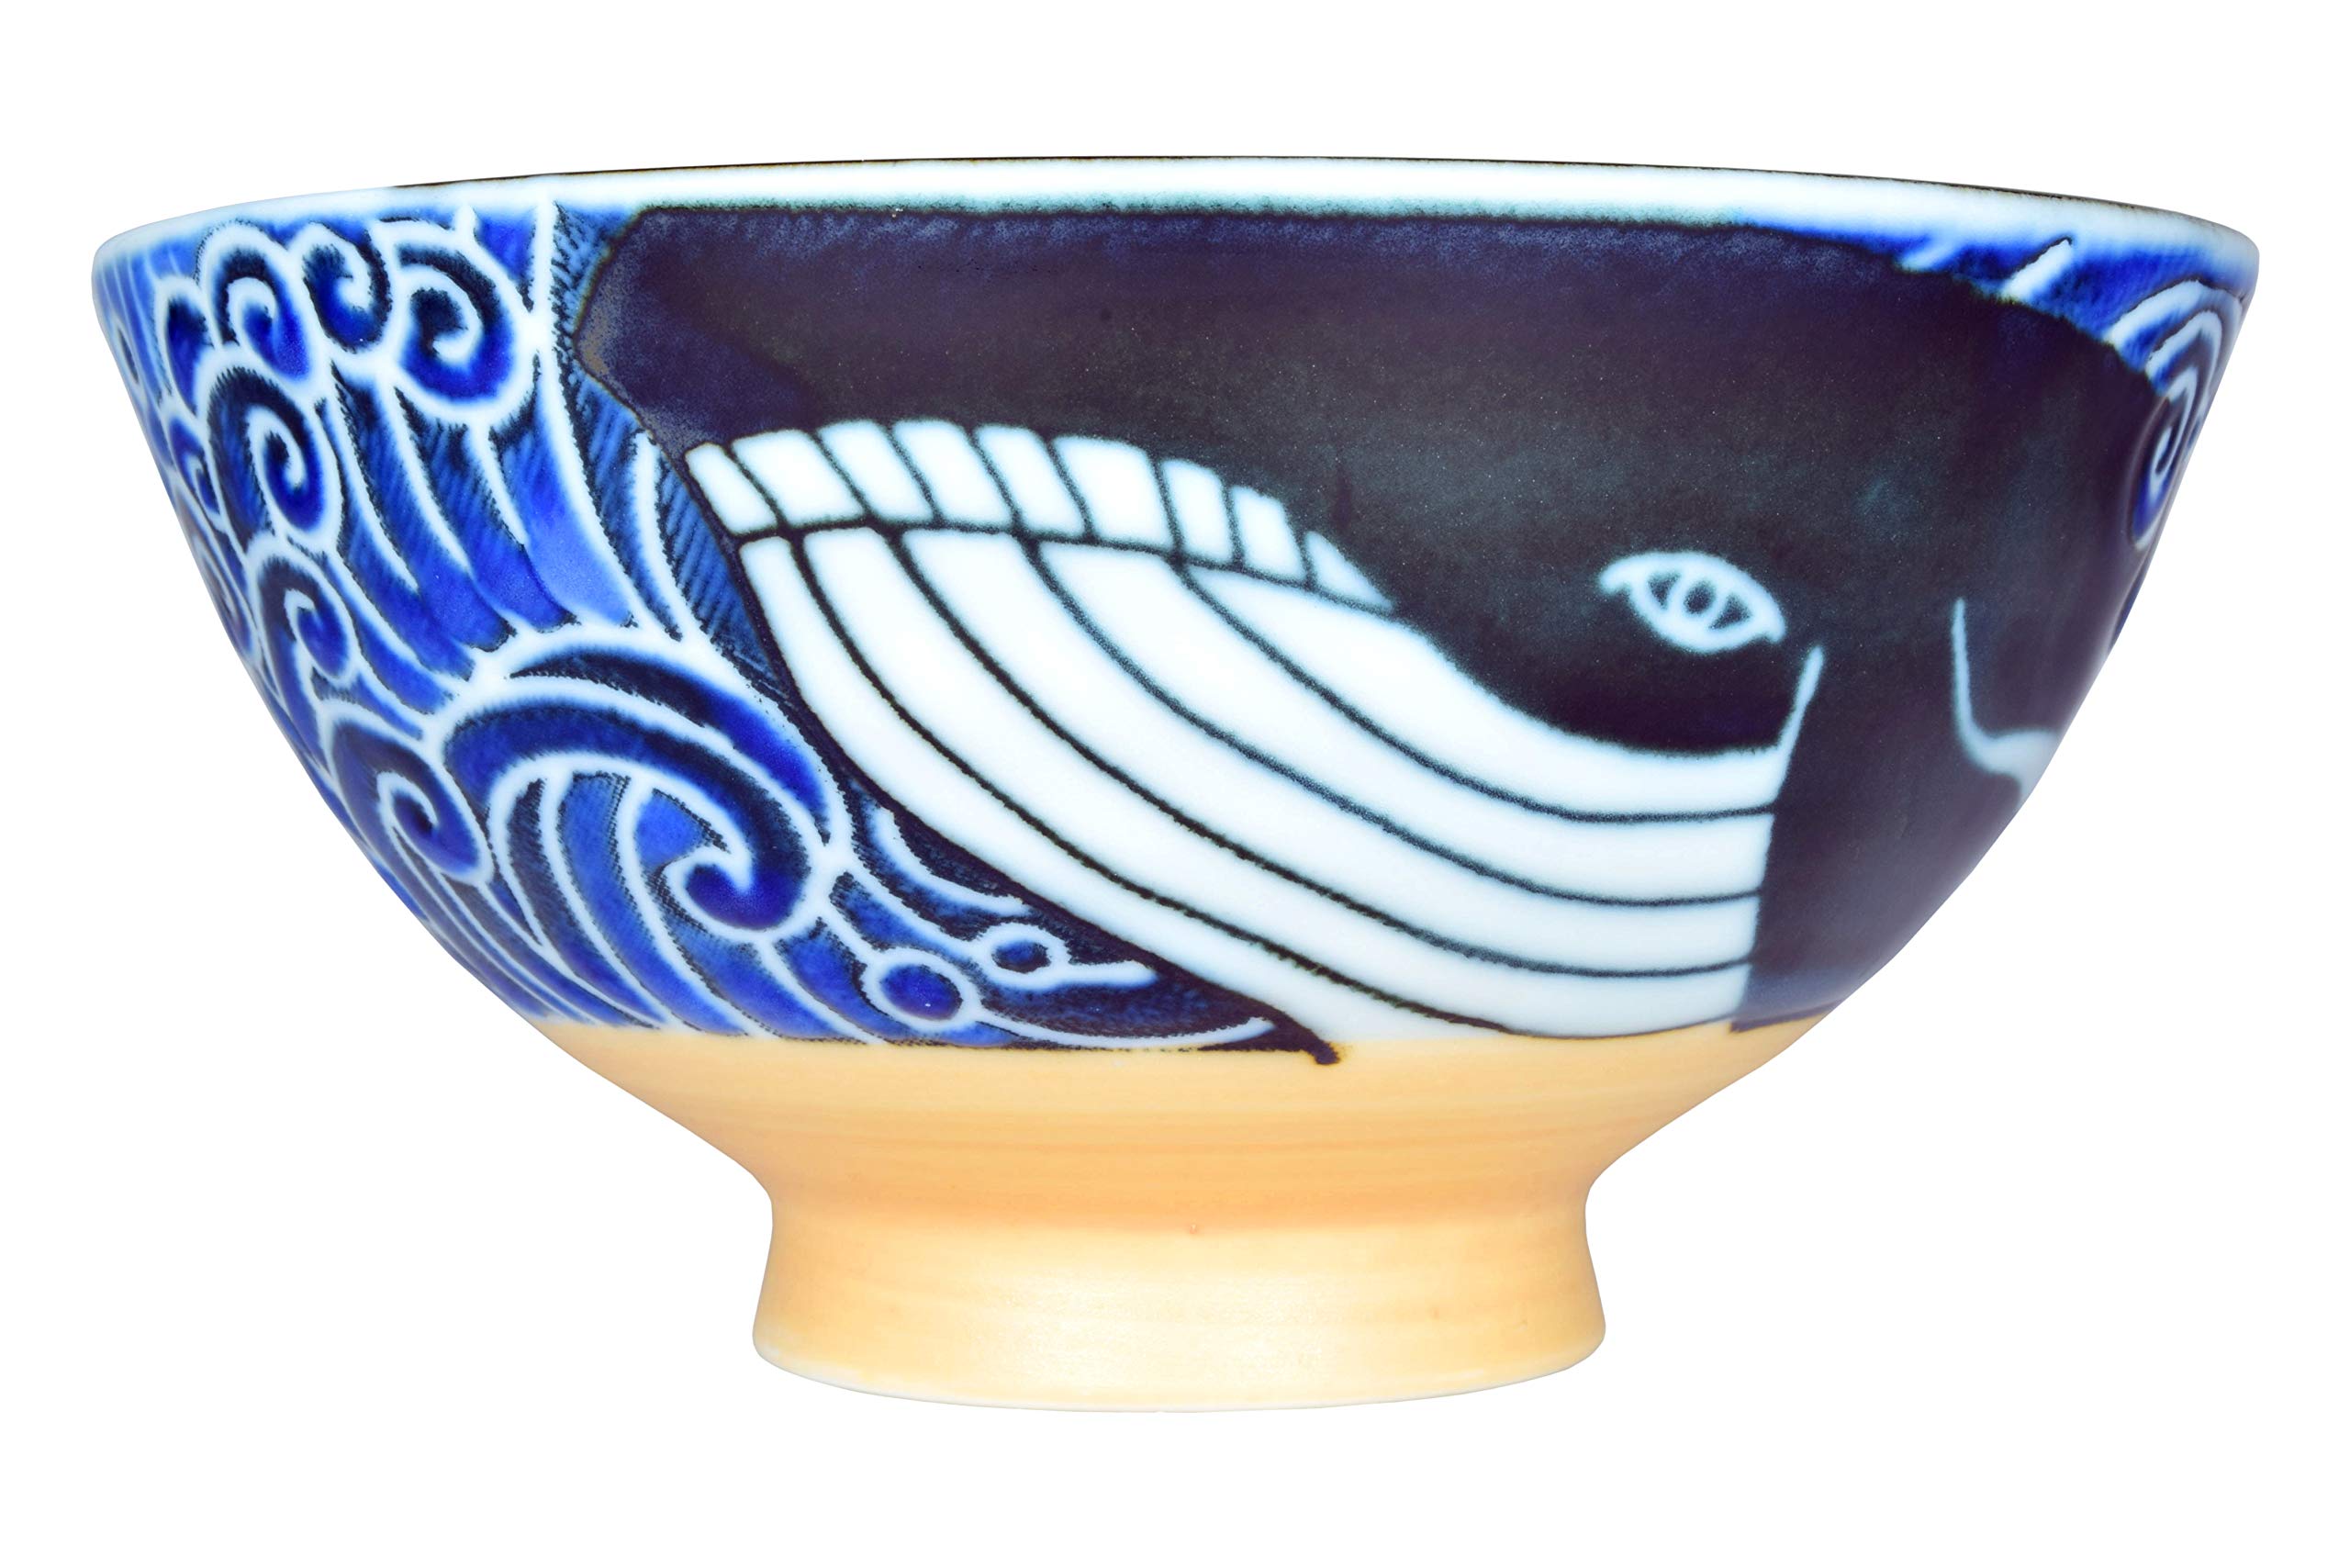 Mino Ware Japanese Rice Bowl, Rice Ramen Noodle Soup Sarada Pasta, Wave Whale Chawn, 4.6 inch 10oz Set of 2